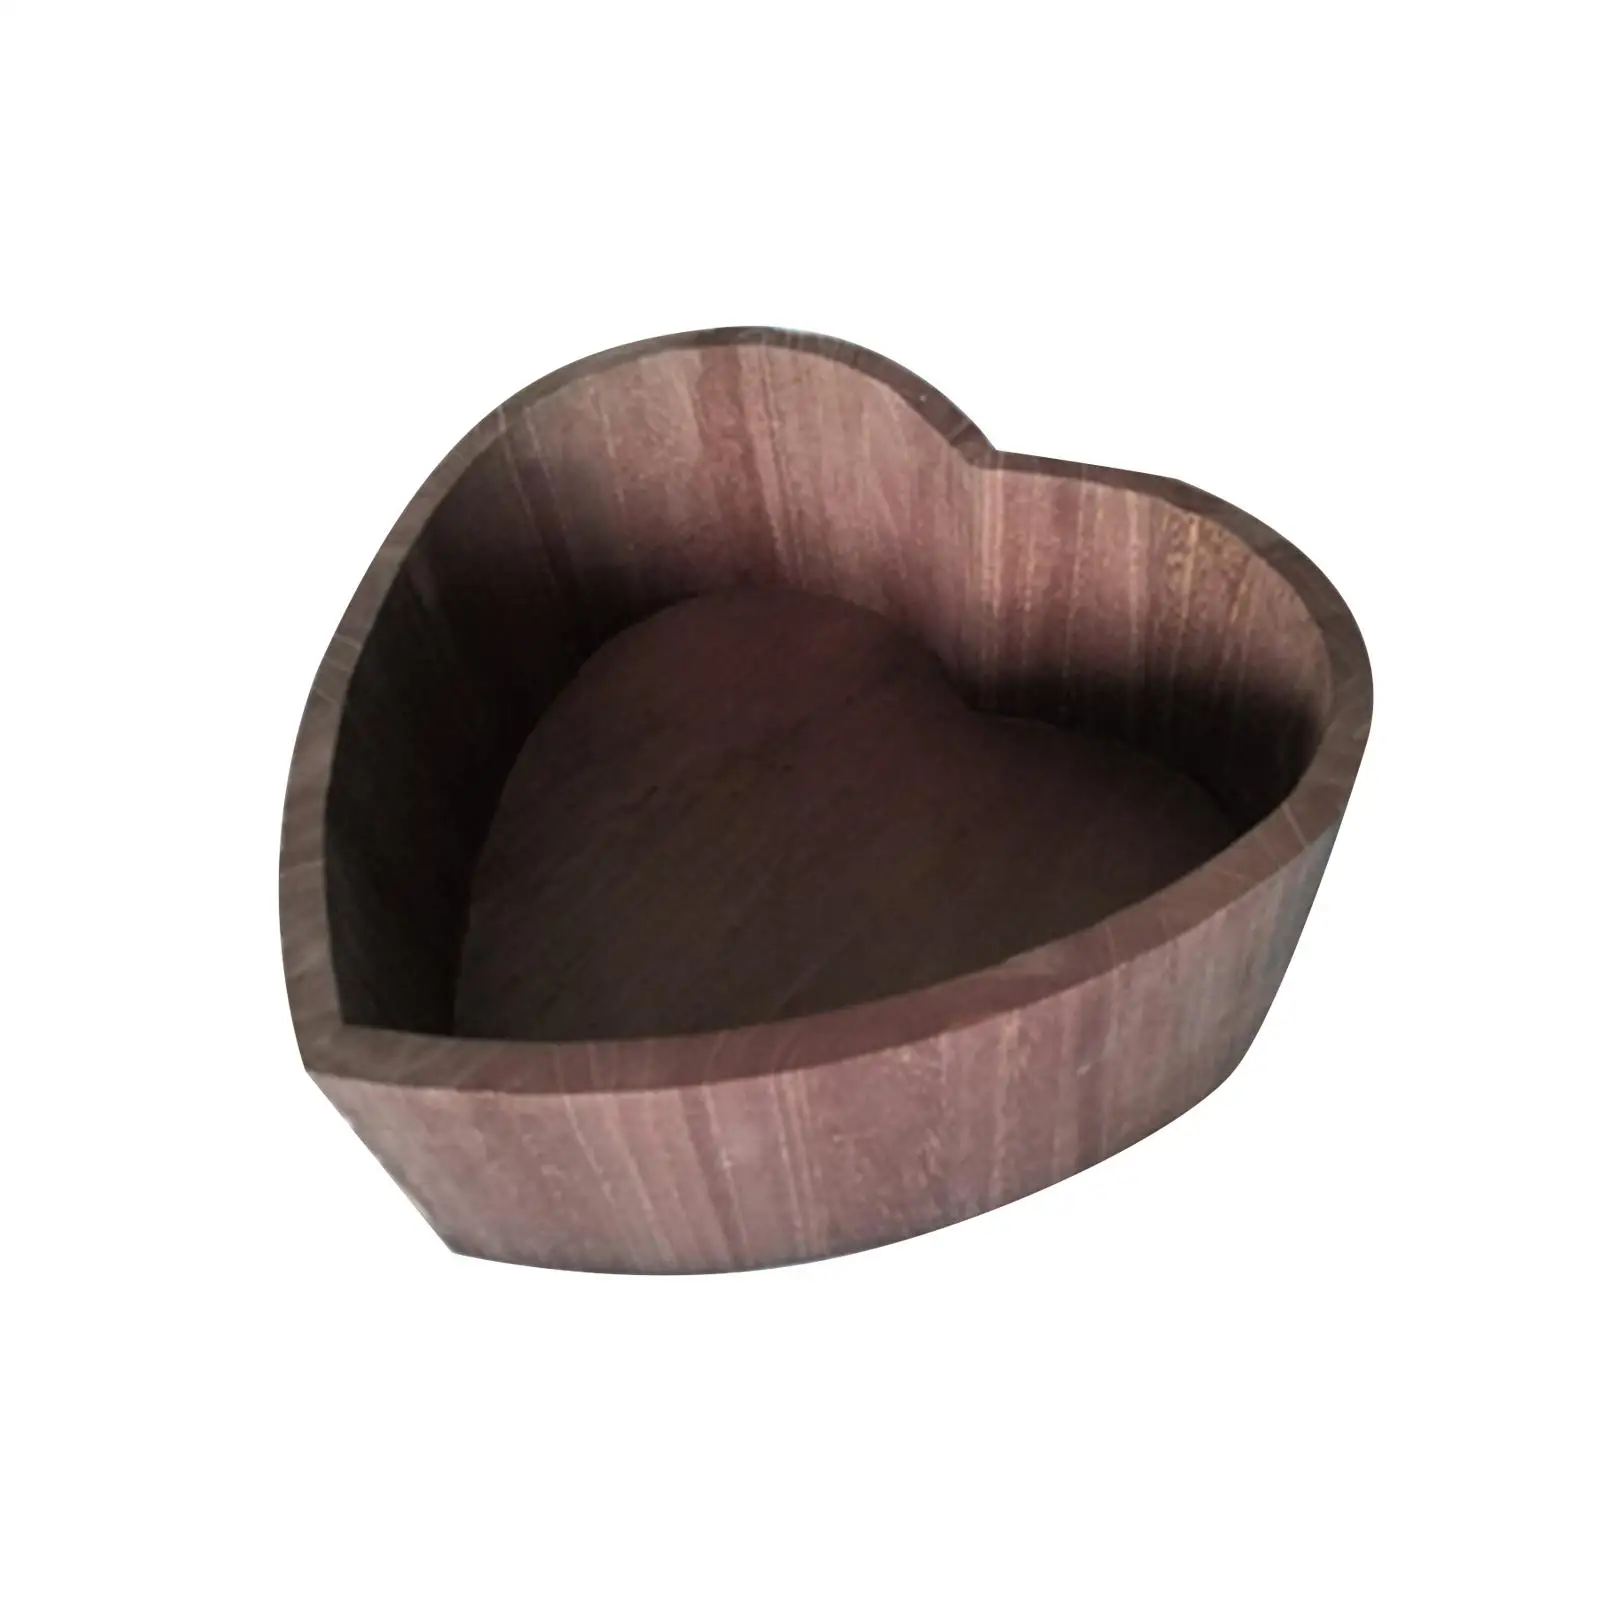 Newborn Infants Photography Props Wood Basin Heart Shaped Accessory Baby Cot